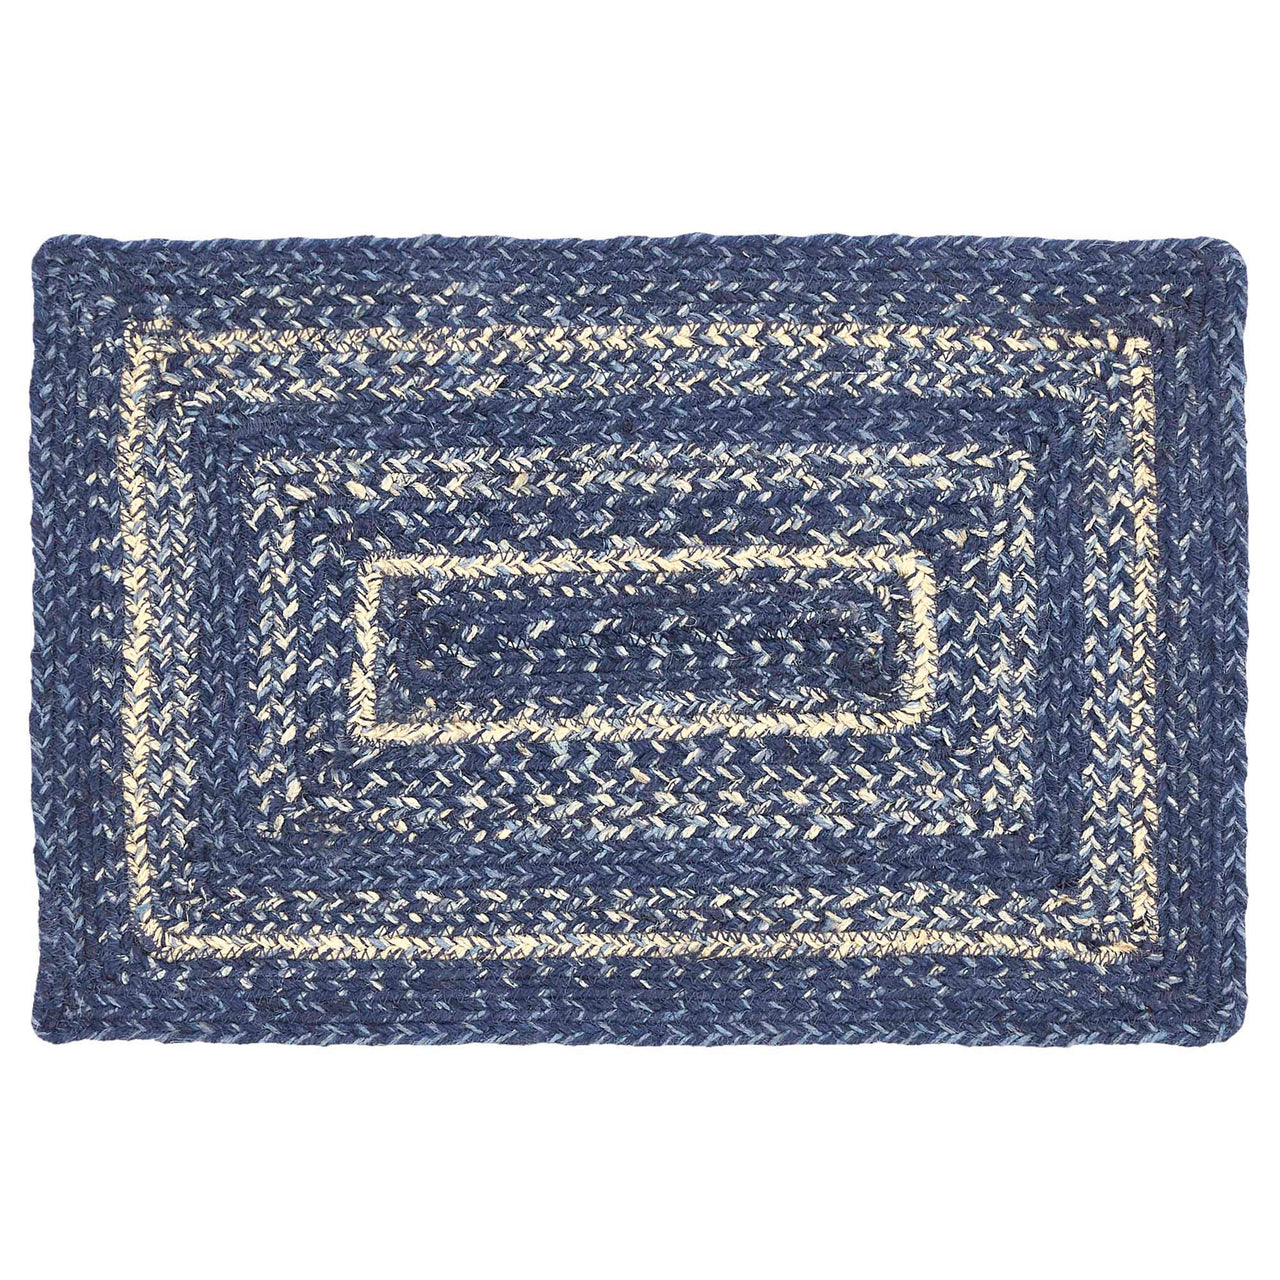 Great Falls Blue Jute Braided Rect Placemat 10"x15" VHC Brands